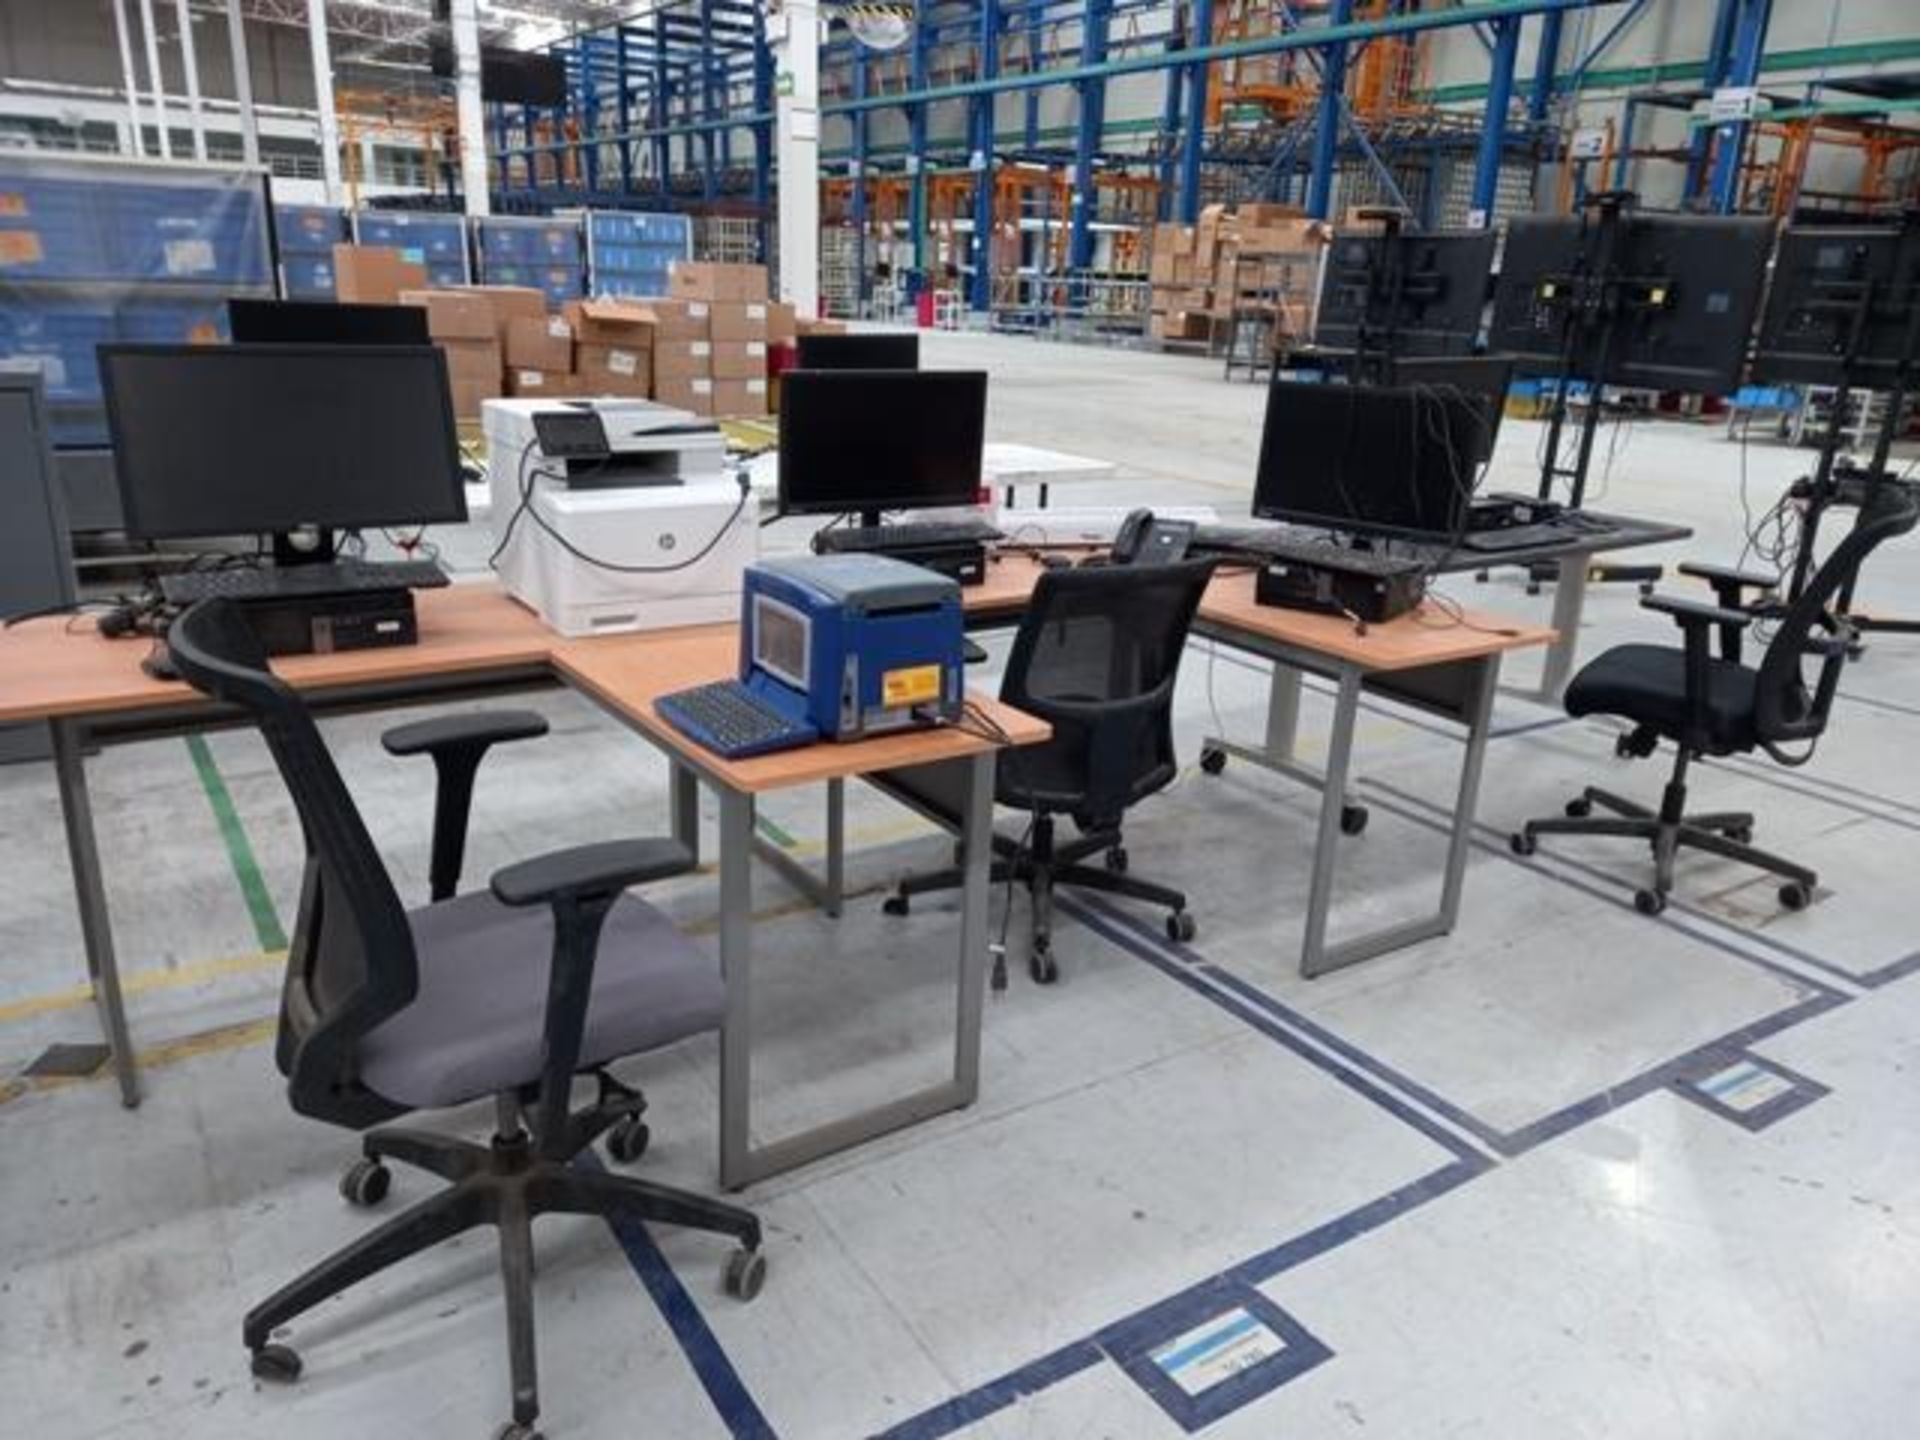 LOT: (66) Of Furniture and Computing Equipment Consisting of: Computers, Printers, Desks, Chairs, Dr - Image 25 of 38